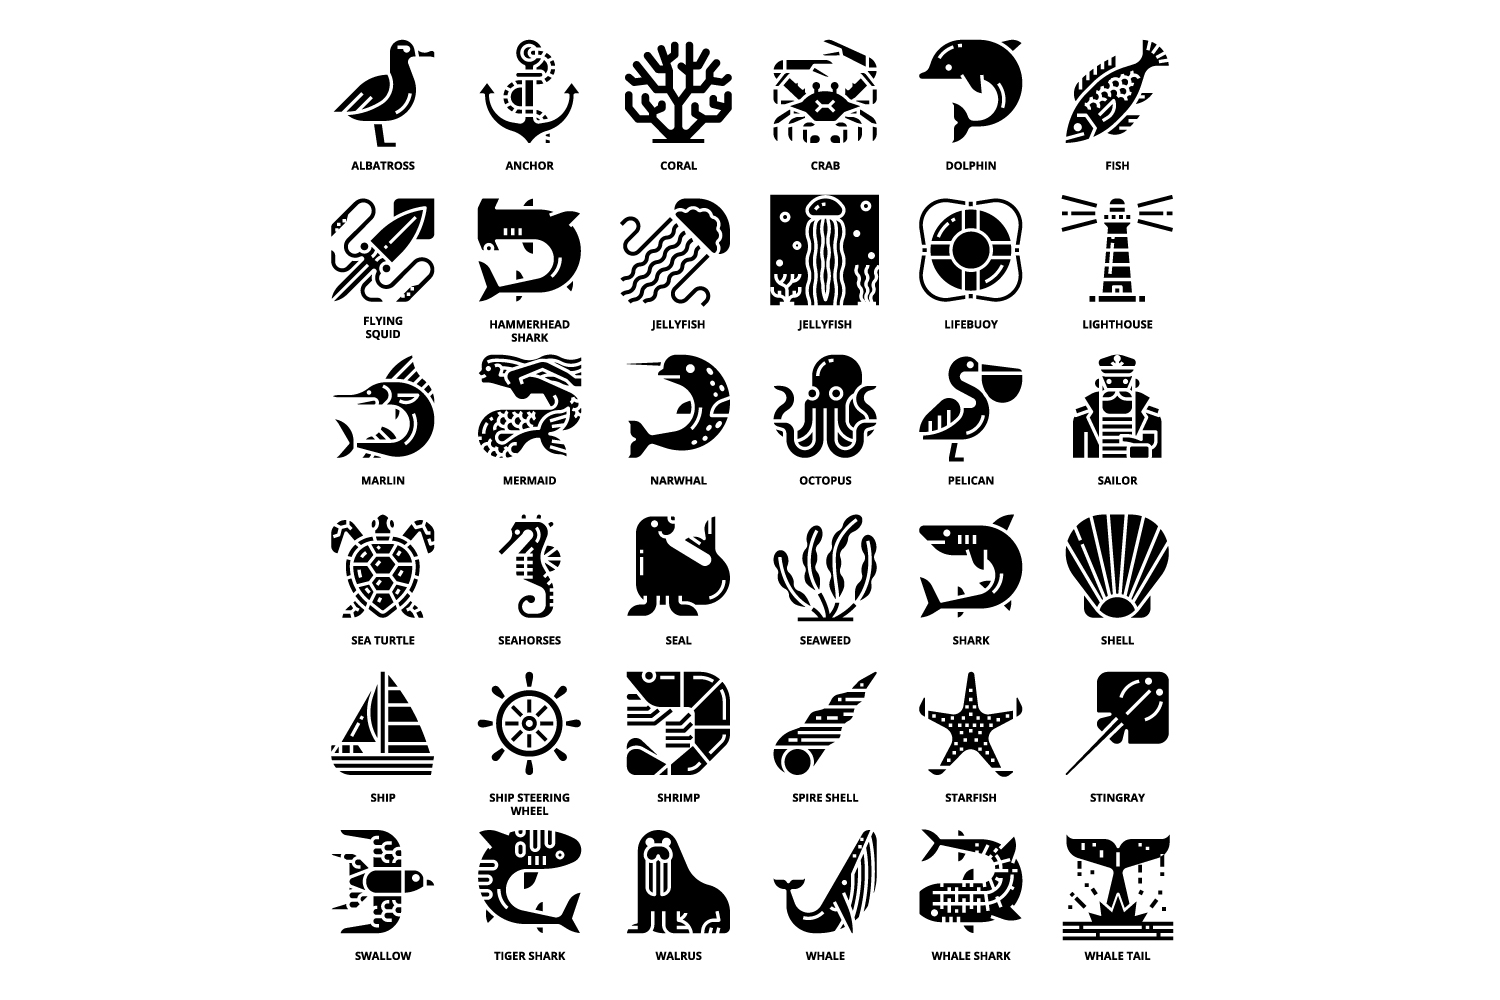 Black and white image of different types of symbols.